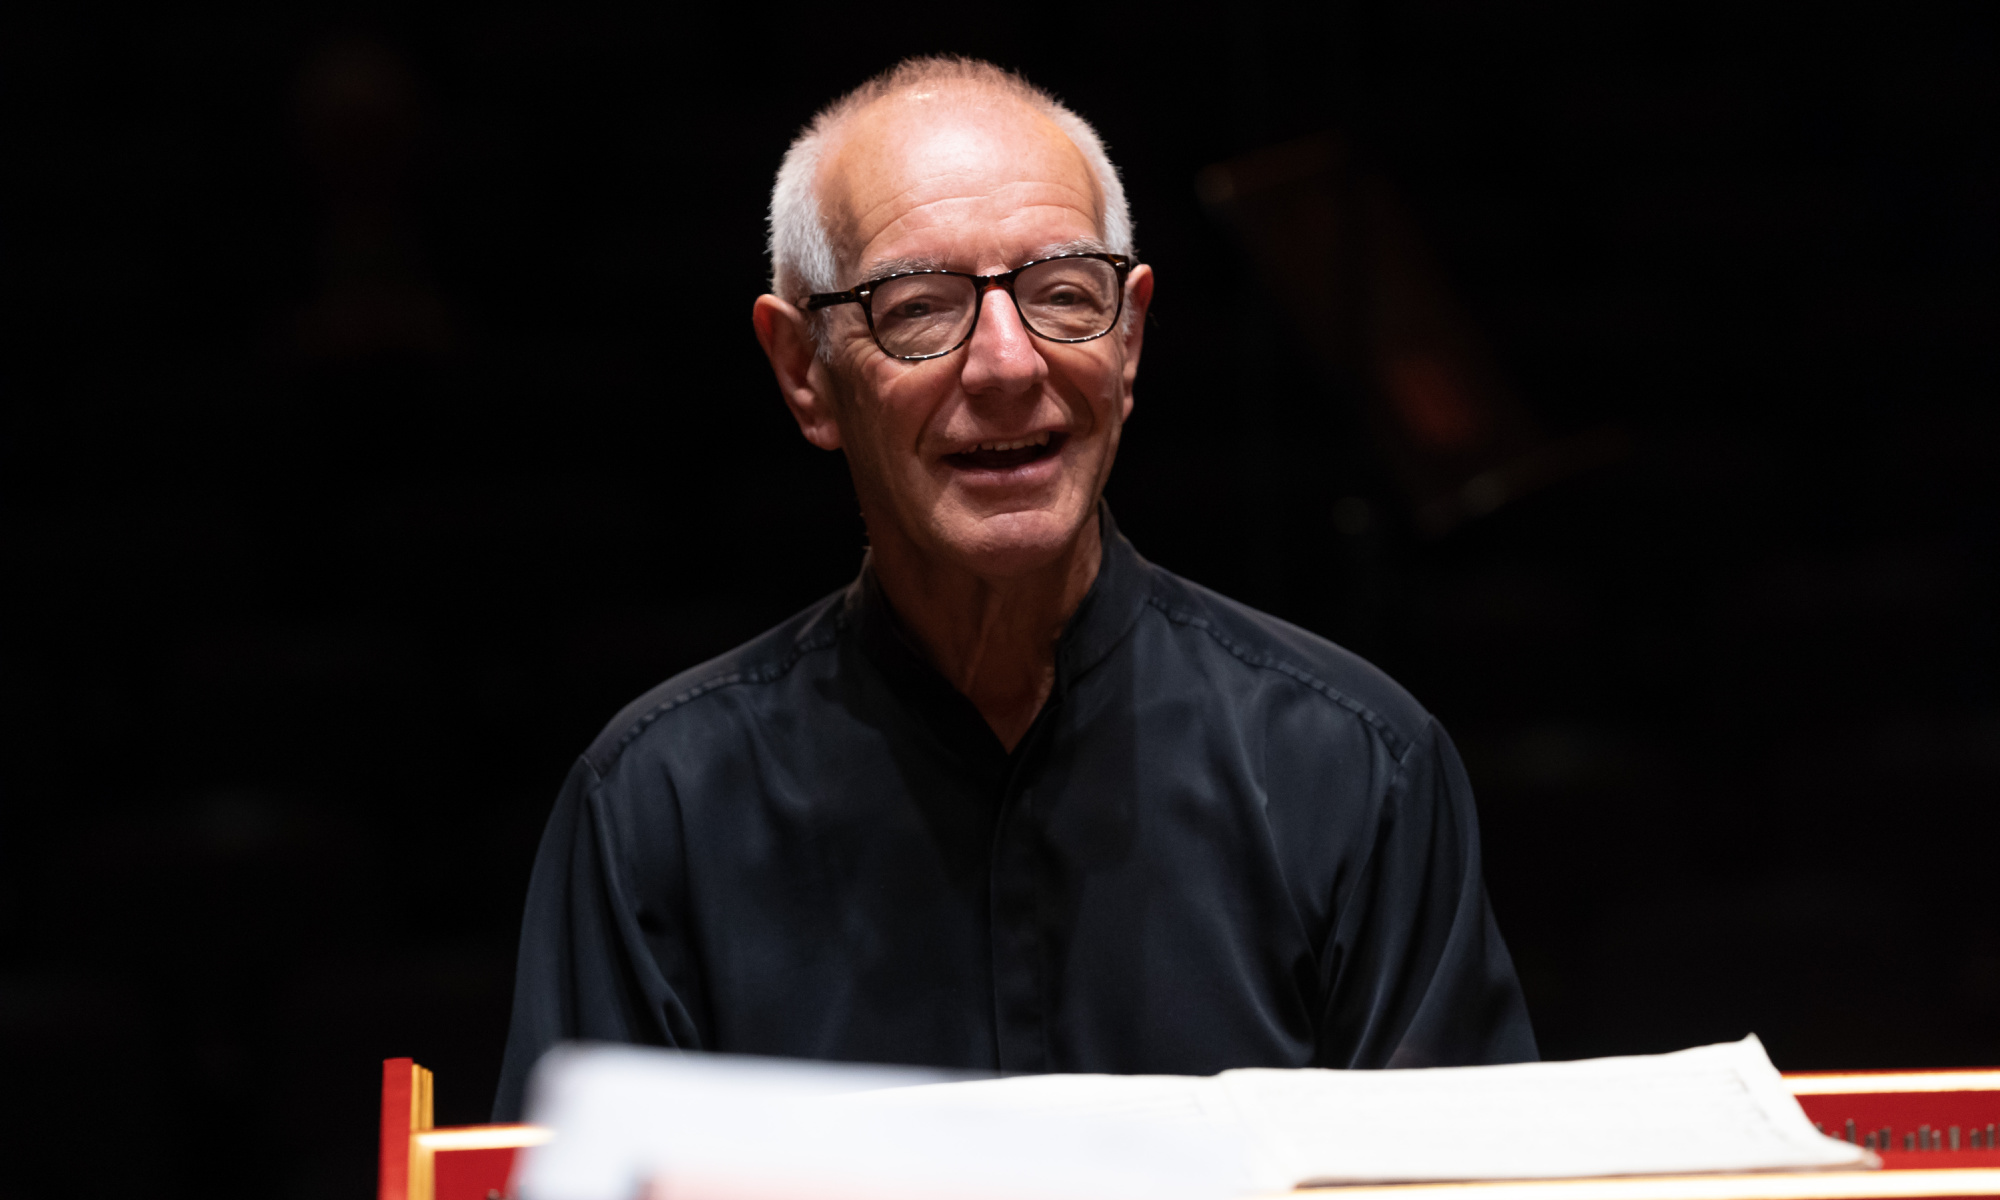 Principal Guest Conductor Nicholas Kraemer smiles while seated in front of a harpsichord.